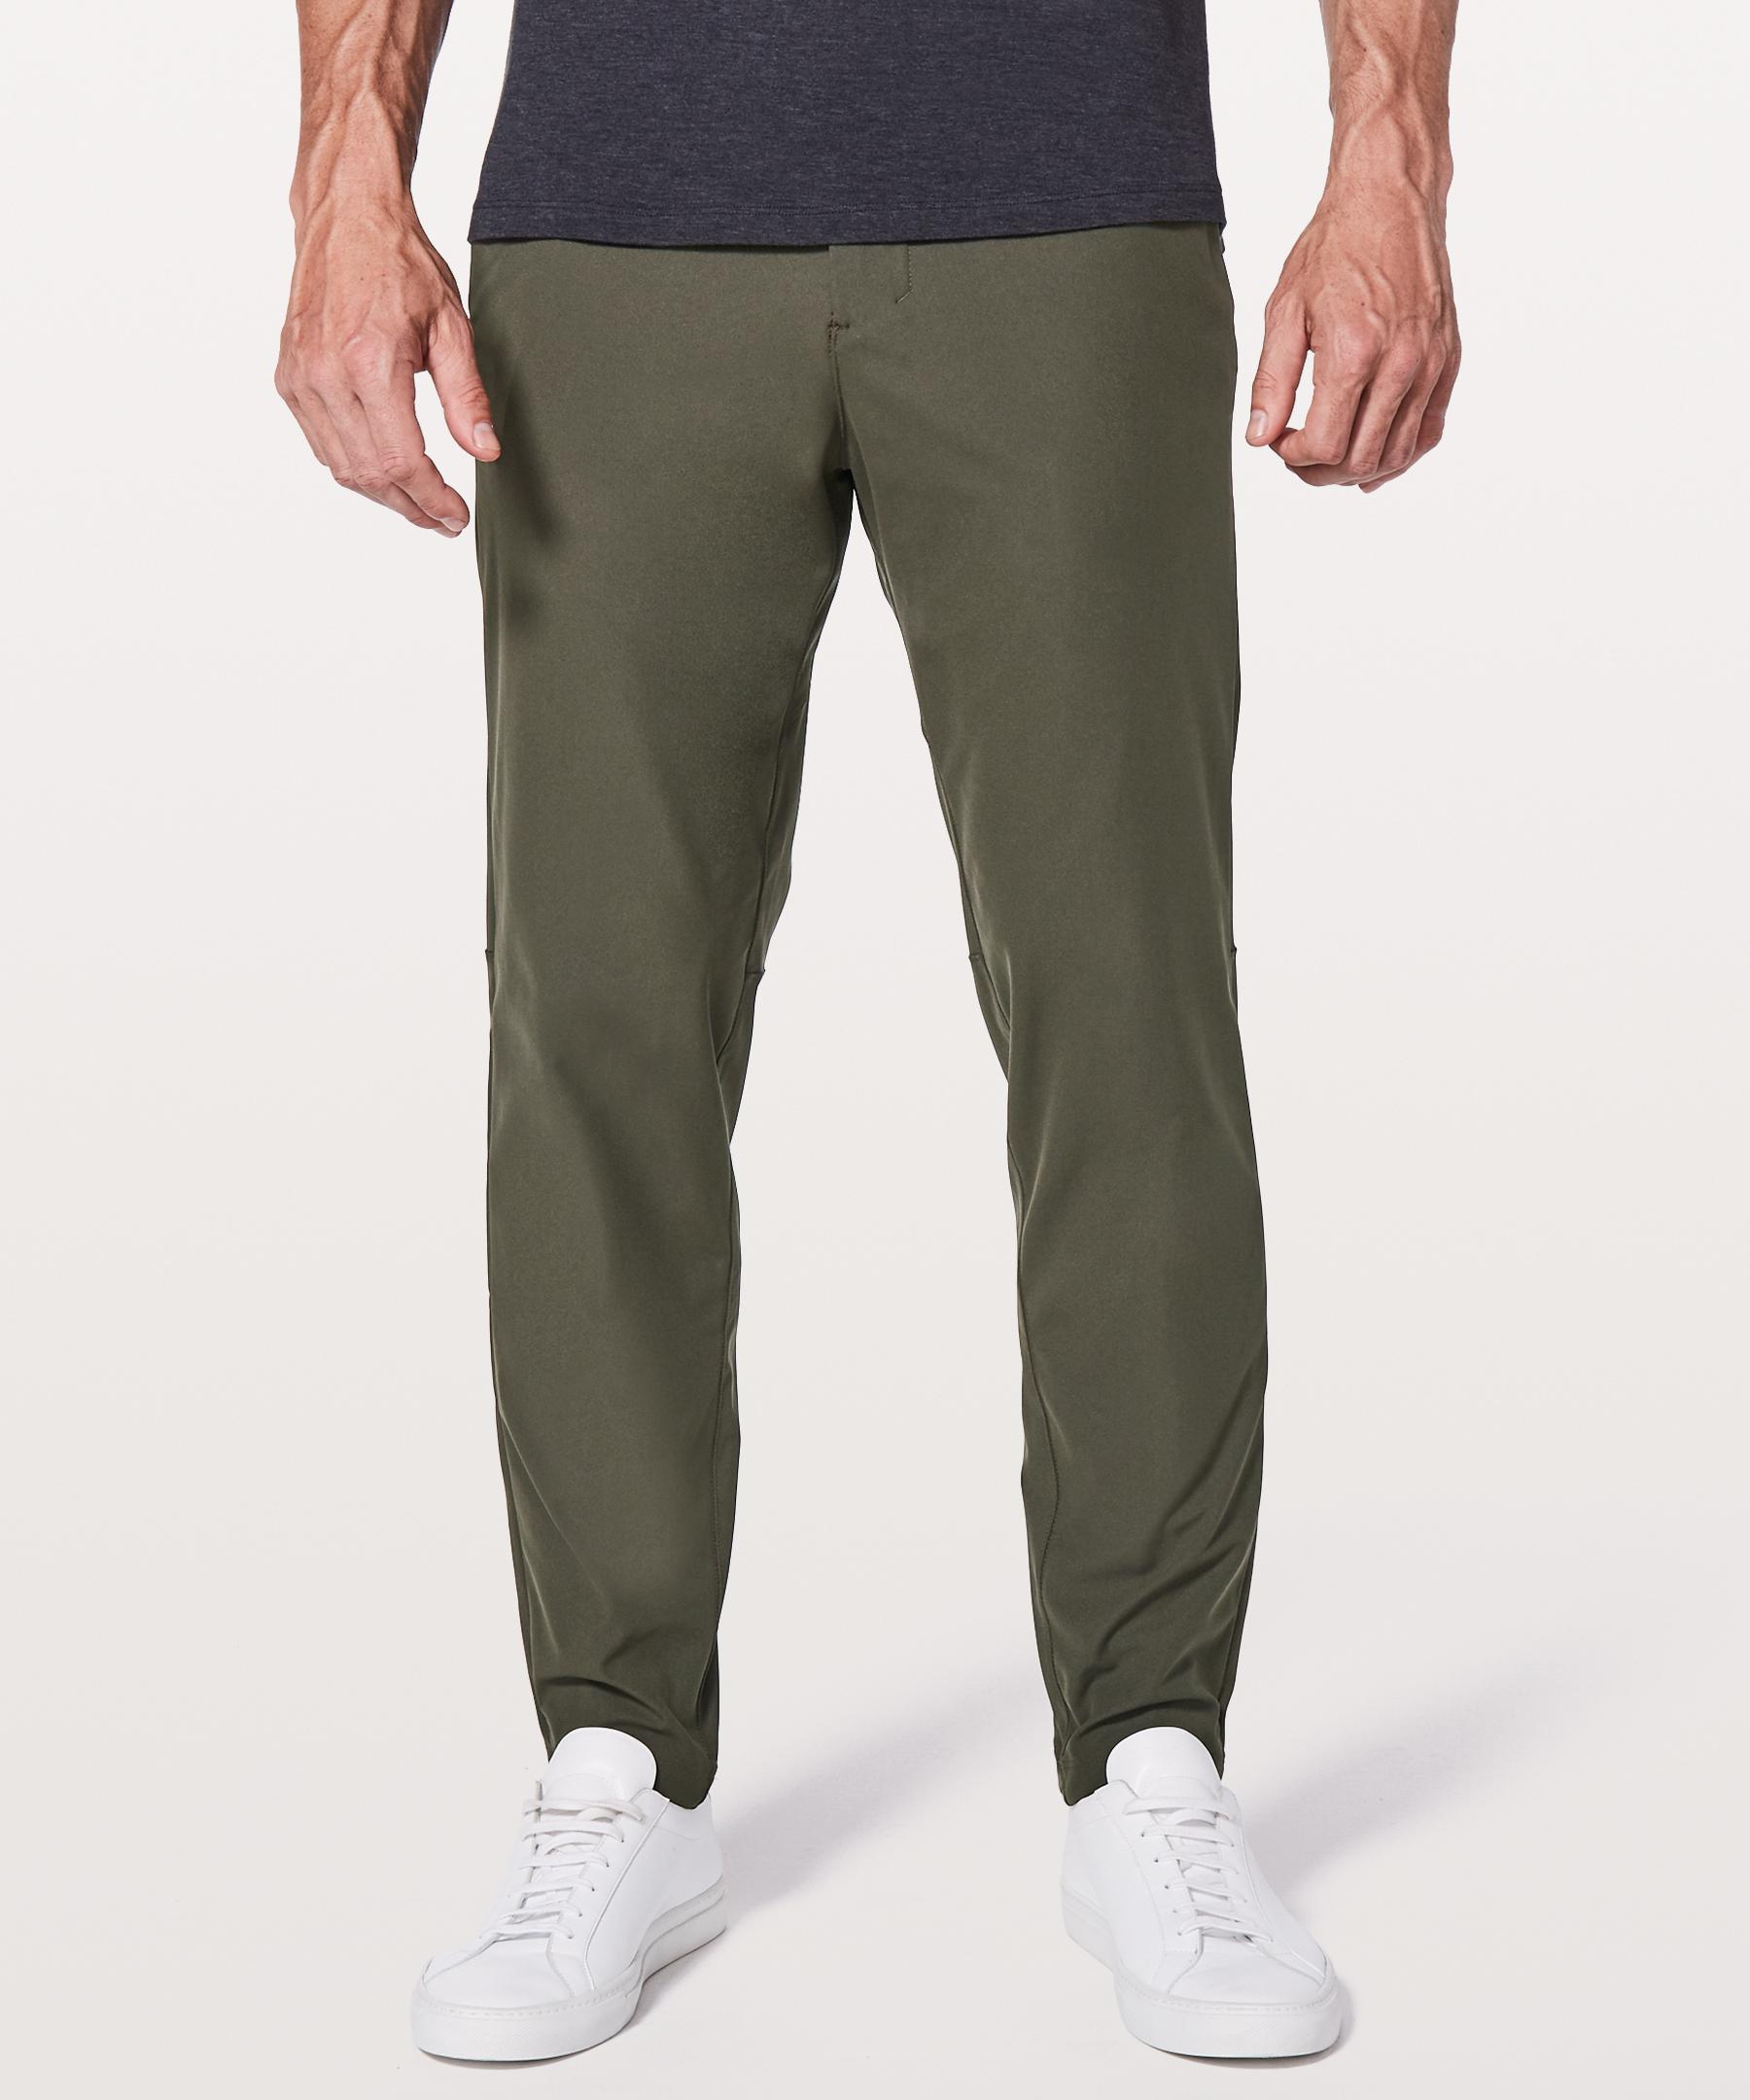 Lululemon Mens Sale Pants  International Society of Precision Agriculture